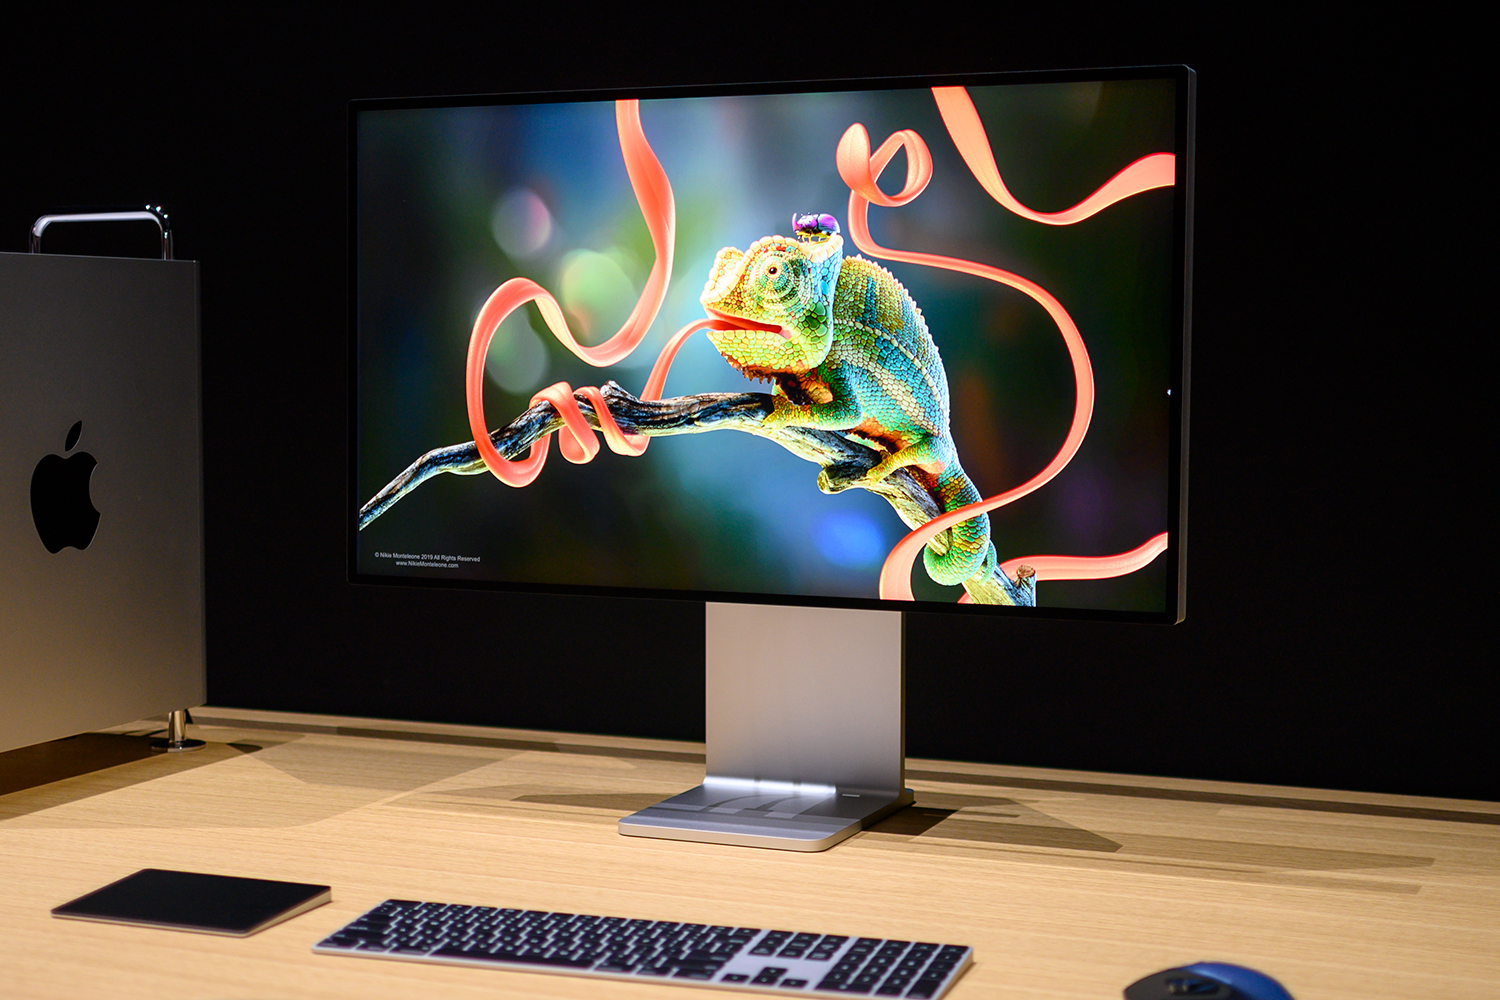 New M1 iMac vs Intel: Specs, features, price, more - 9to5Mac